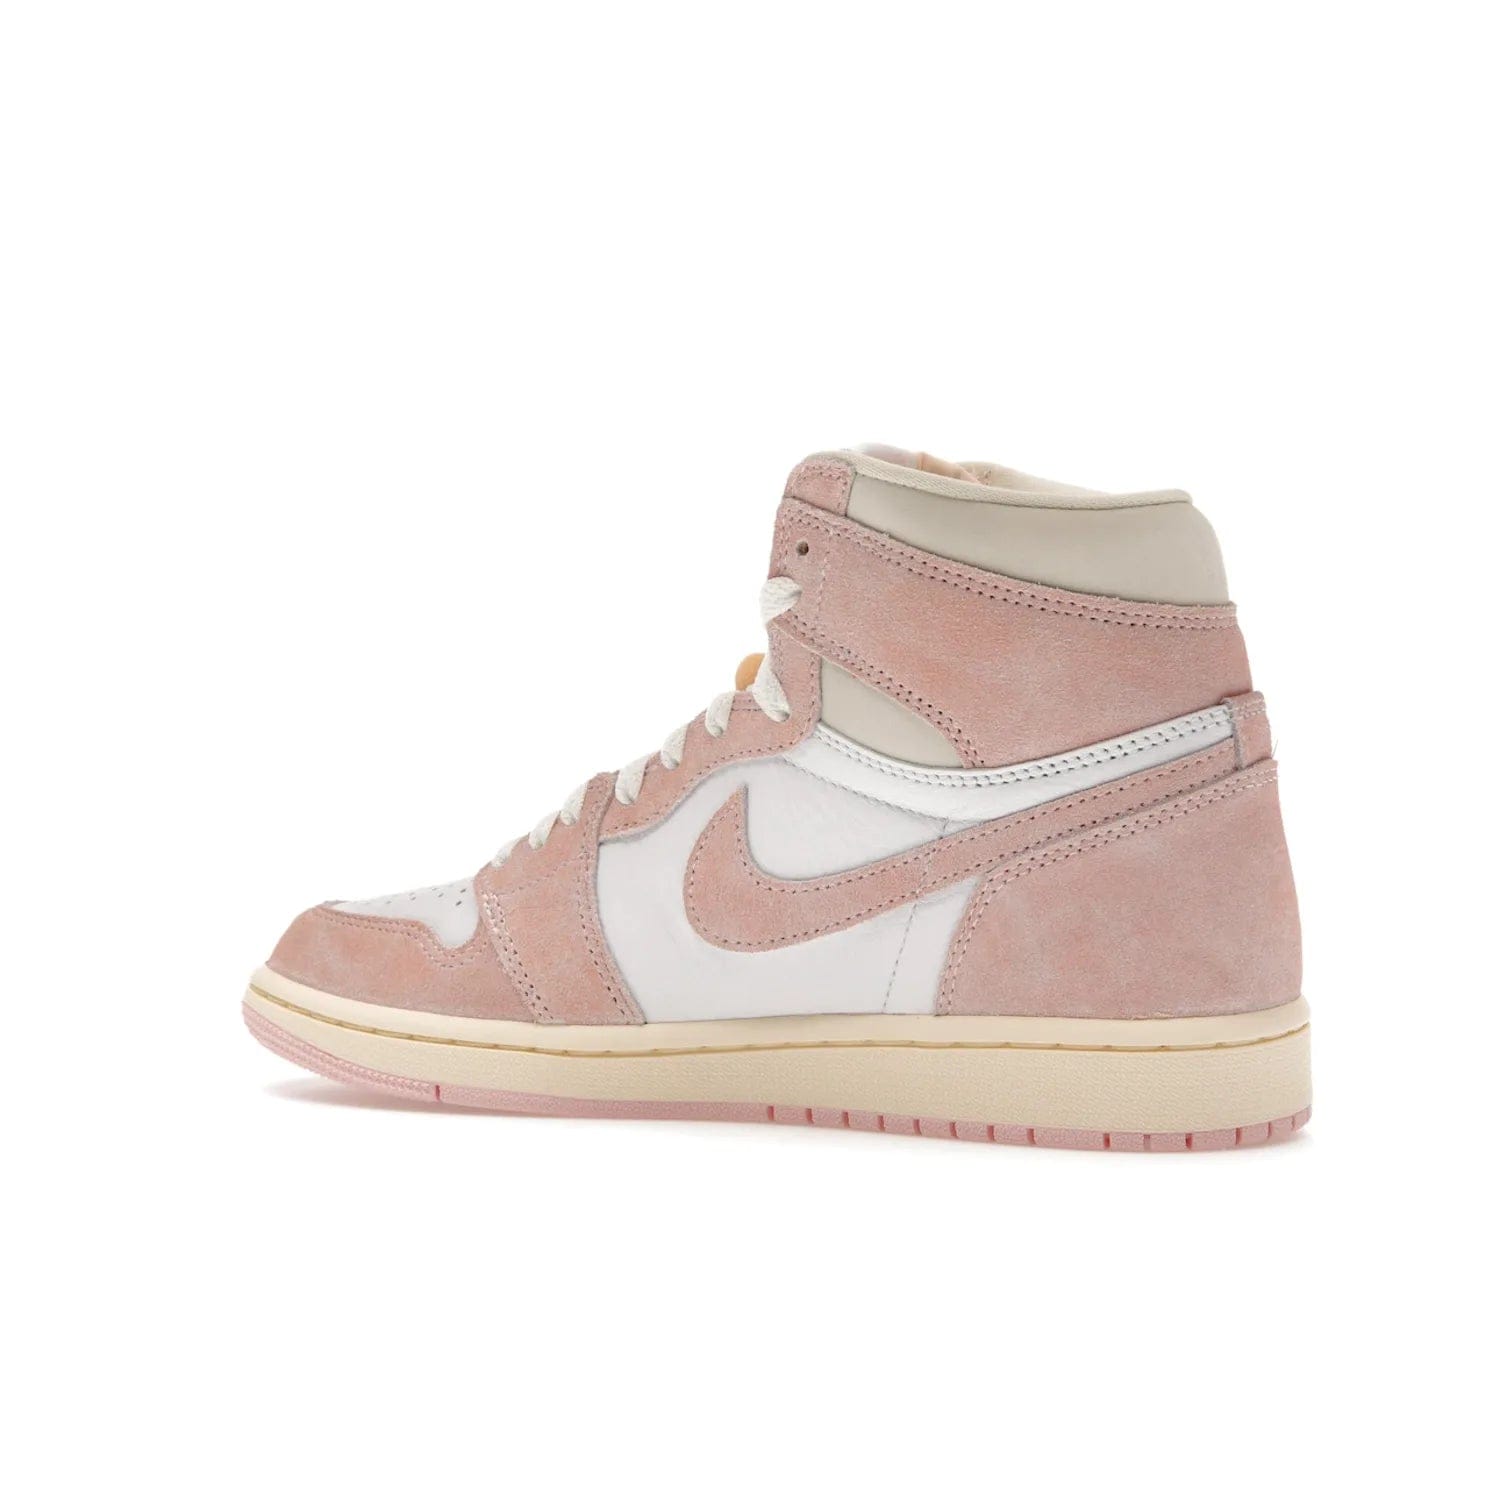 Jordan 1 Retro High OG Washed Pink (Women's) - Image 22 - Only at www.BallersClubKickz.com - Iconic Air Jordan 1 Retro High OG for women with unique pink suede and white leather uppers. Get the timeless look on April 22, 2023.